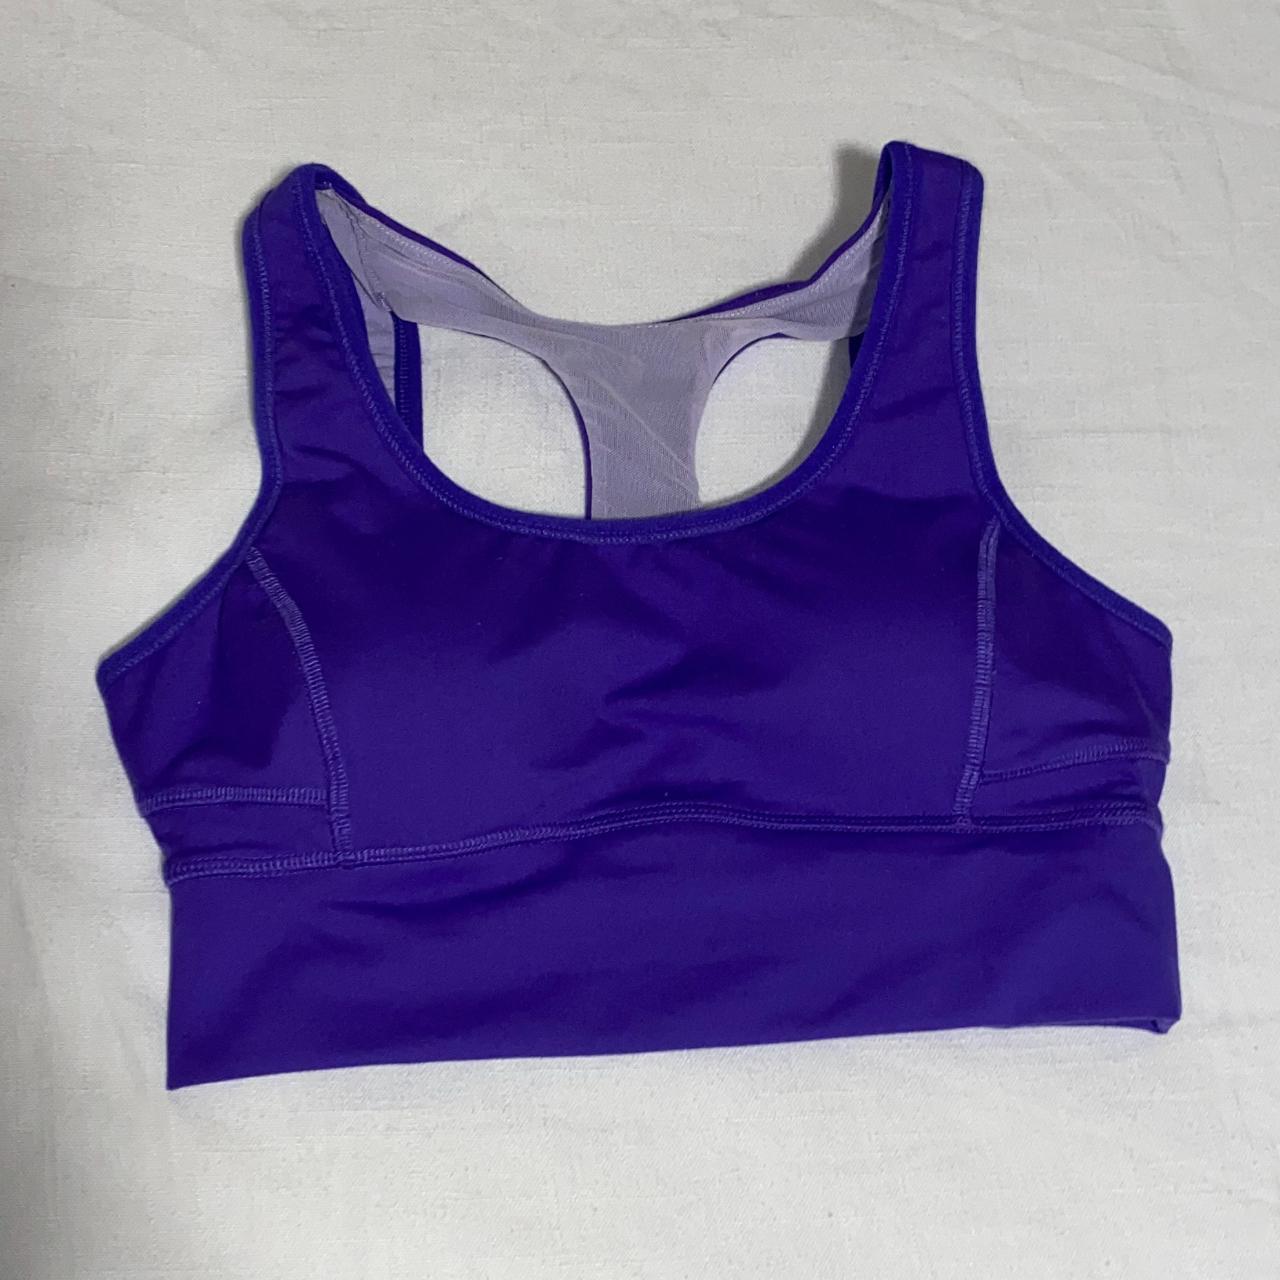 size small DSG sports bra with built in padding. it - Depop